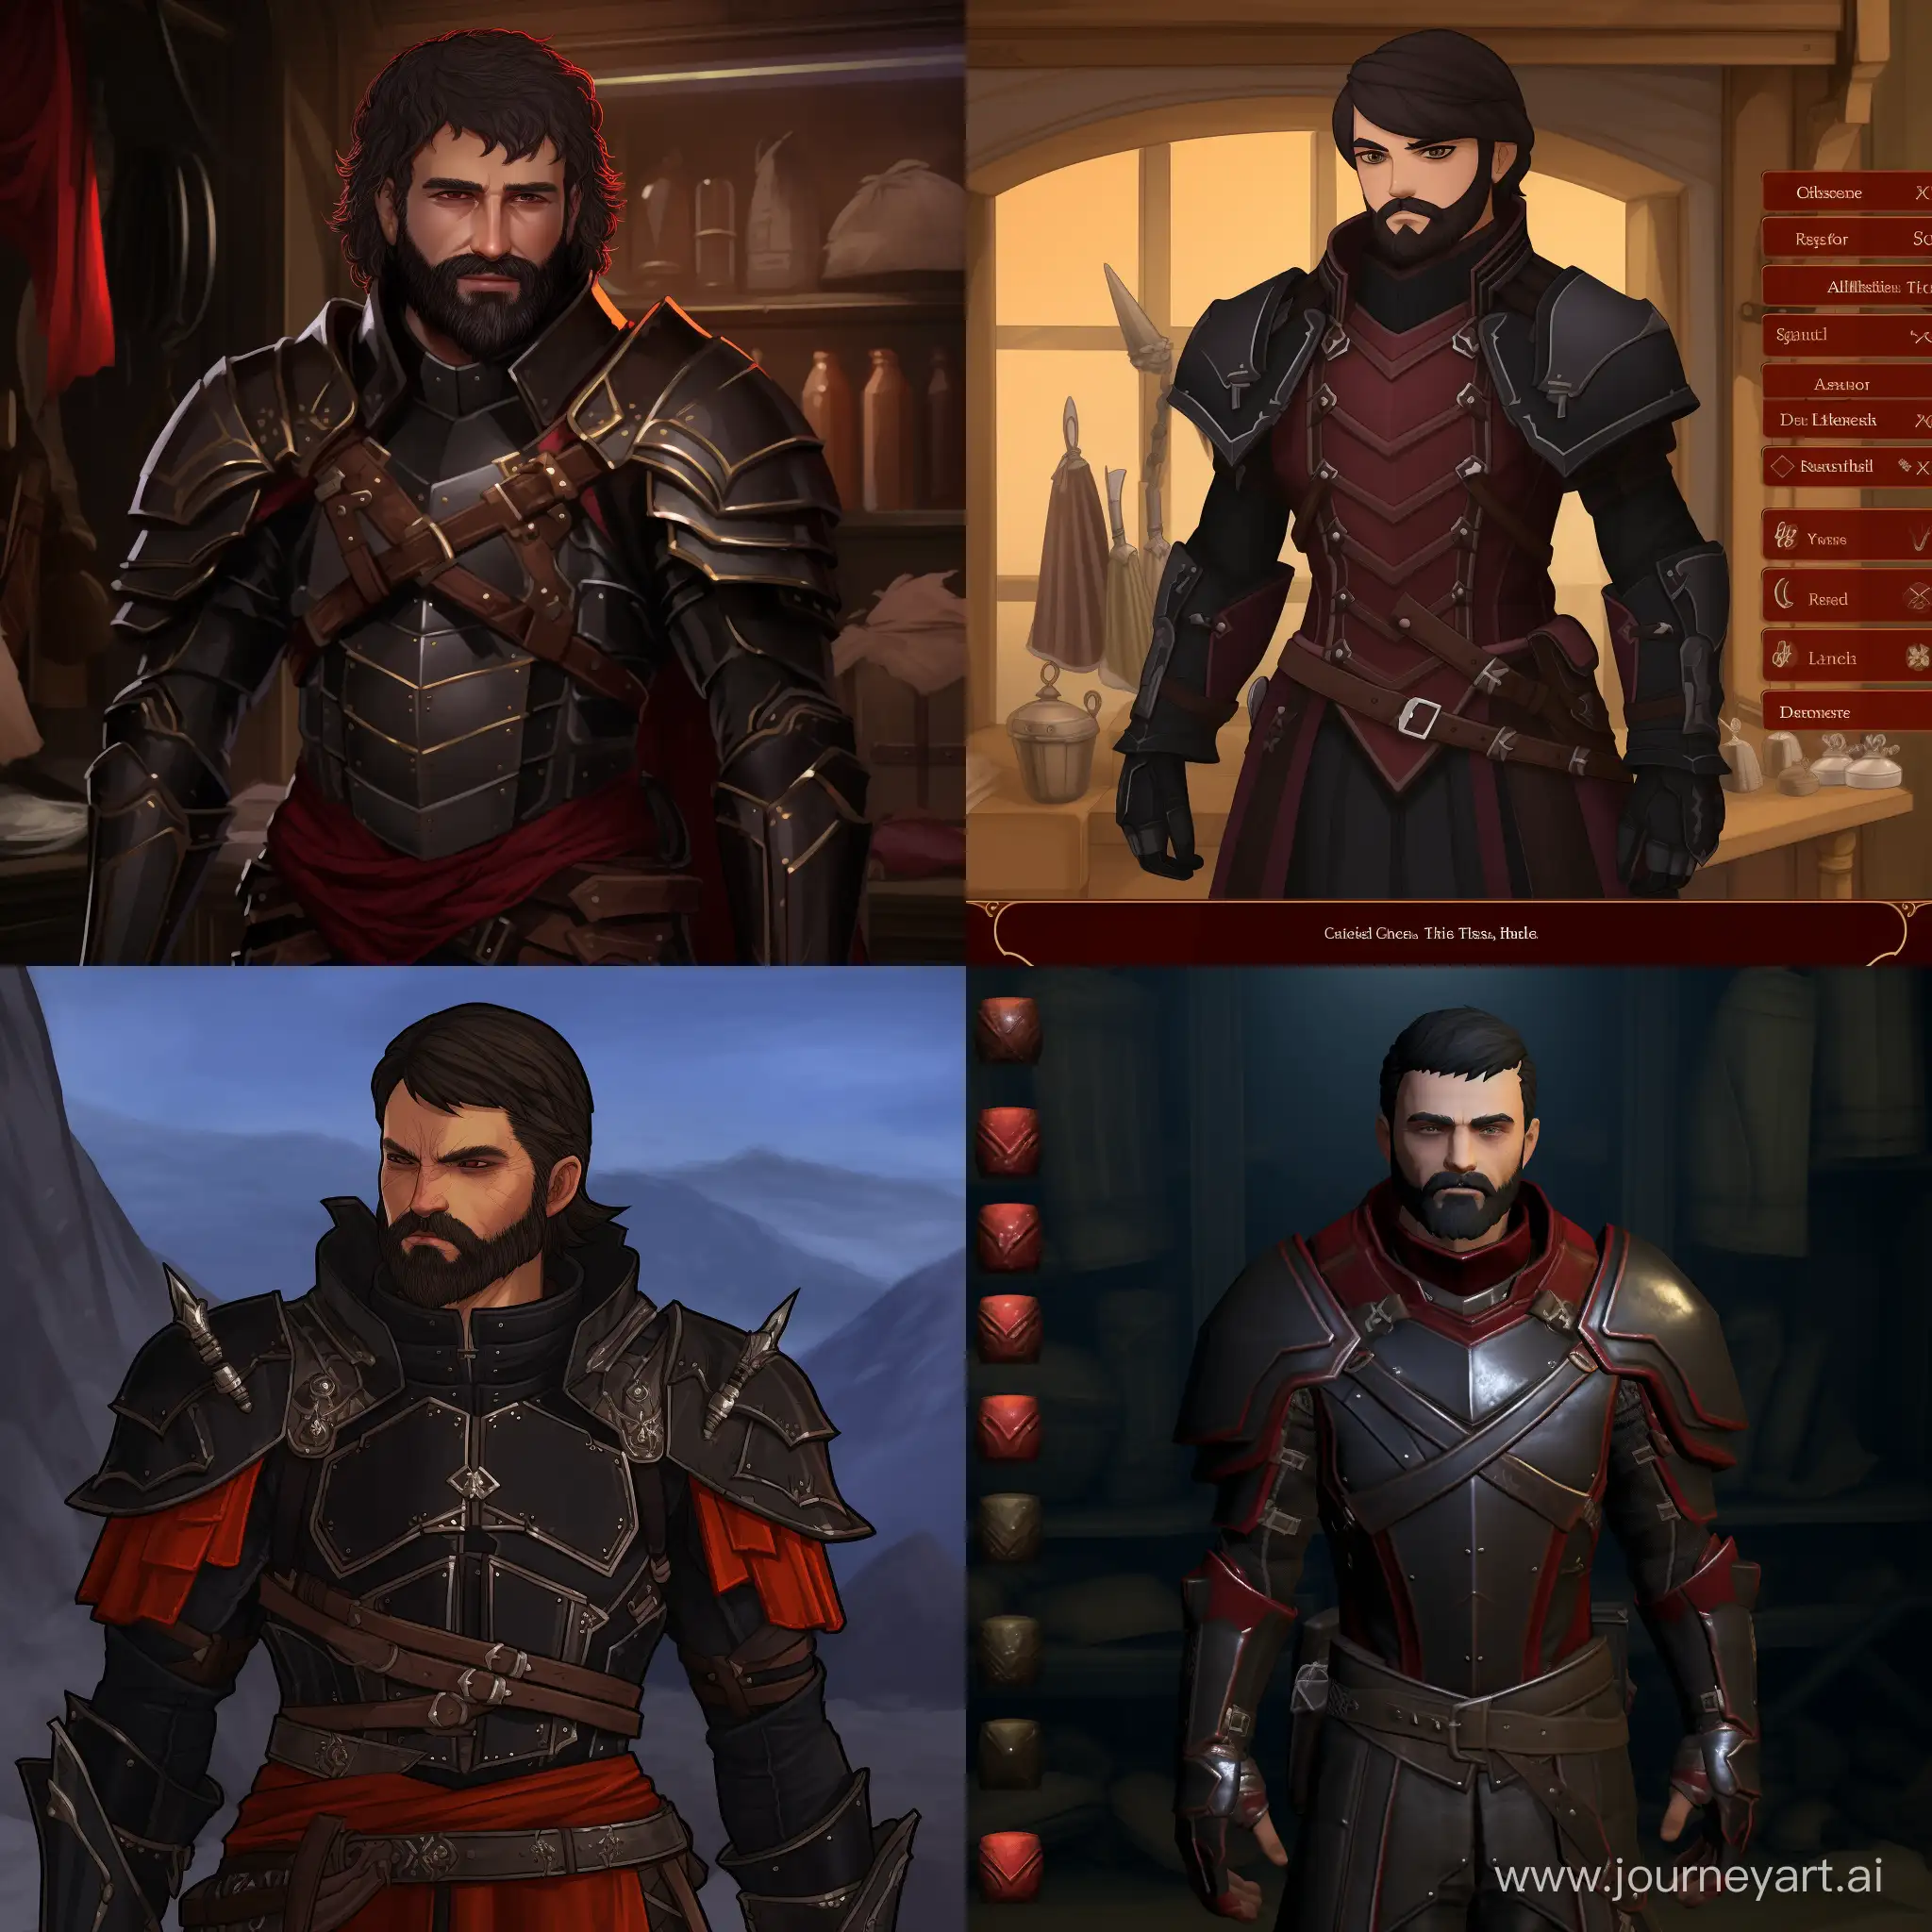 The skin is pale, crimson eyes. Short black beard. Scar on the eyebrow. shoulder length black hair. He is dressed in a black shirt under a burgundy cuirass, trousers made of reinforced fabric with leather inserts. The cuirass is made in the form of several plates of dark metal and black and red leather. Black raincoat. A half-vampire.sinewy body. Tattoo on the arm in the form of a sword.